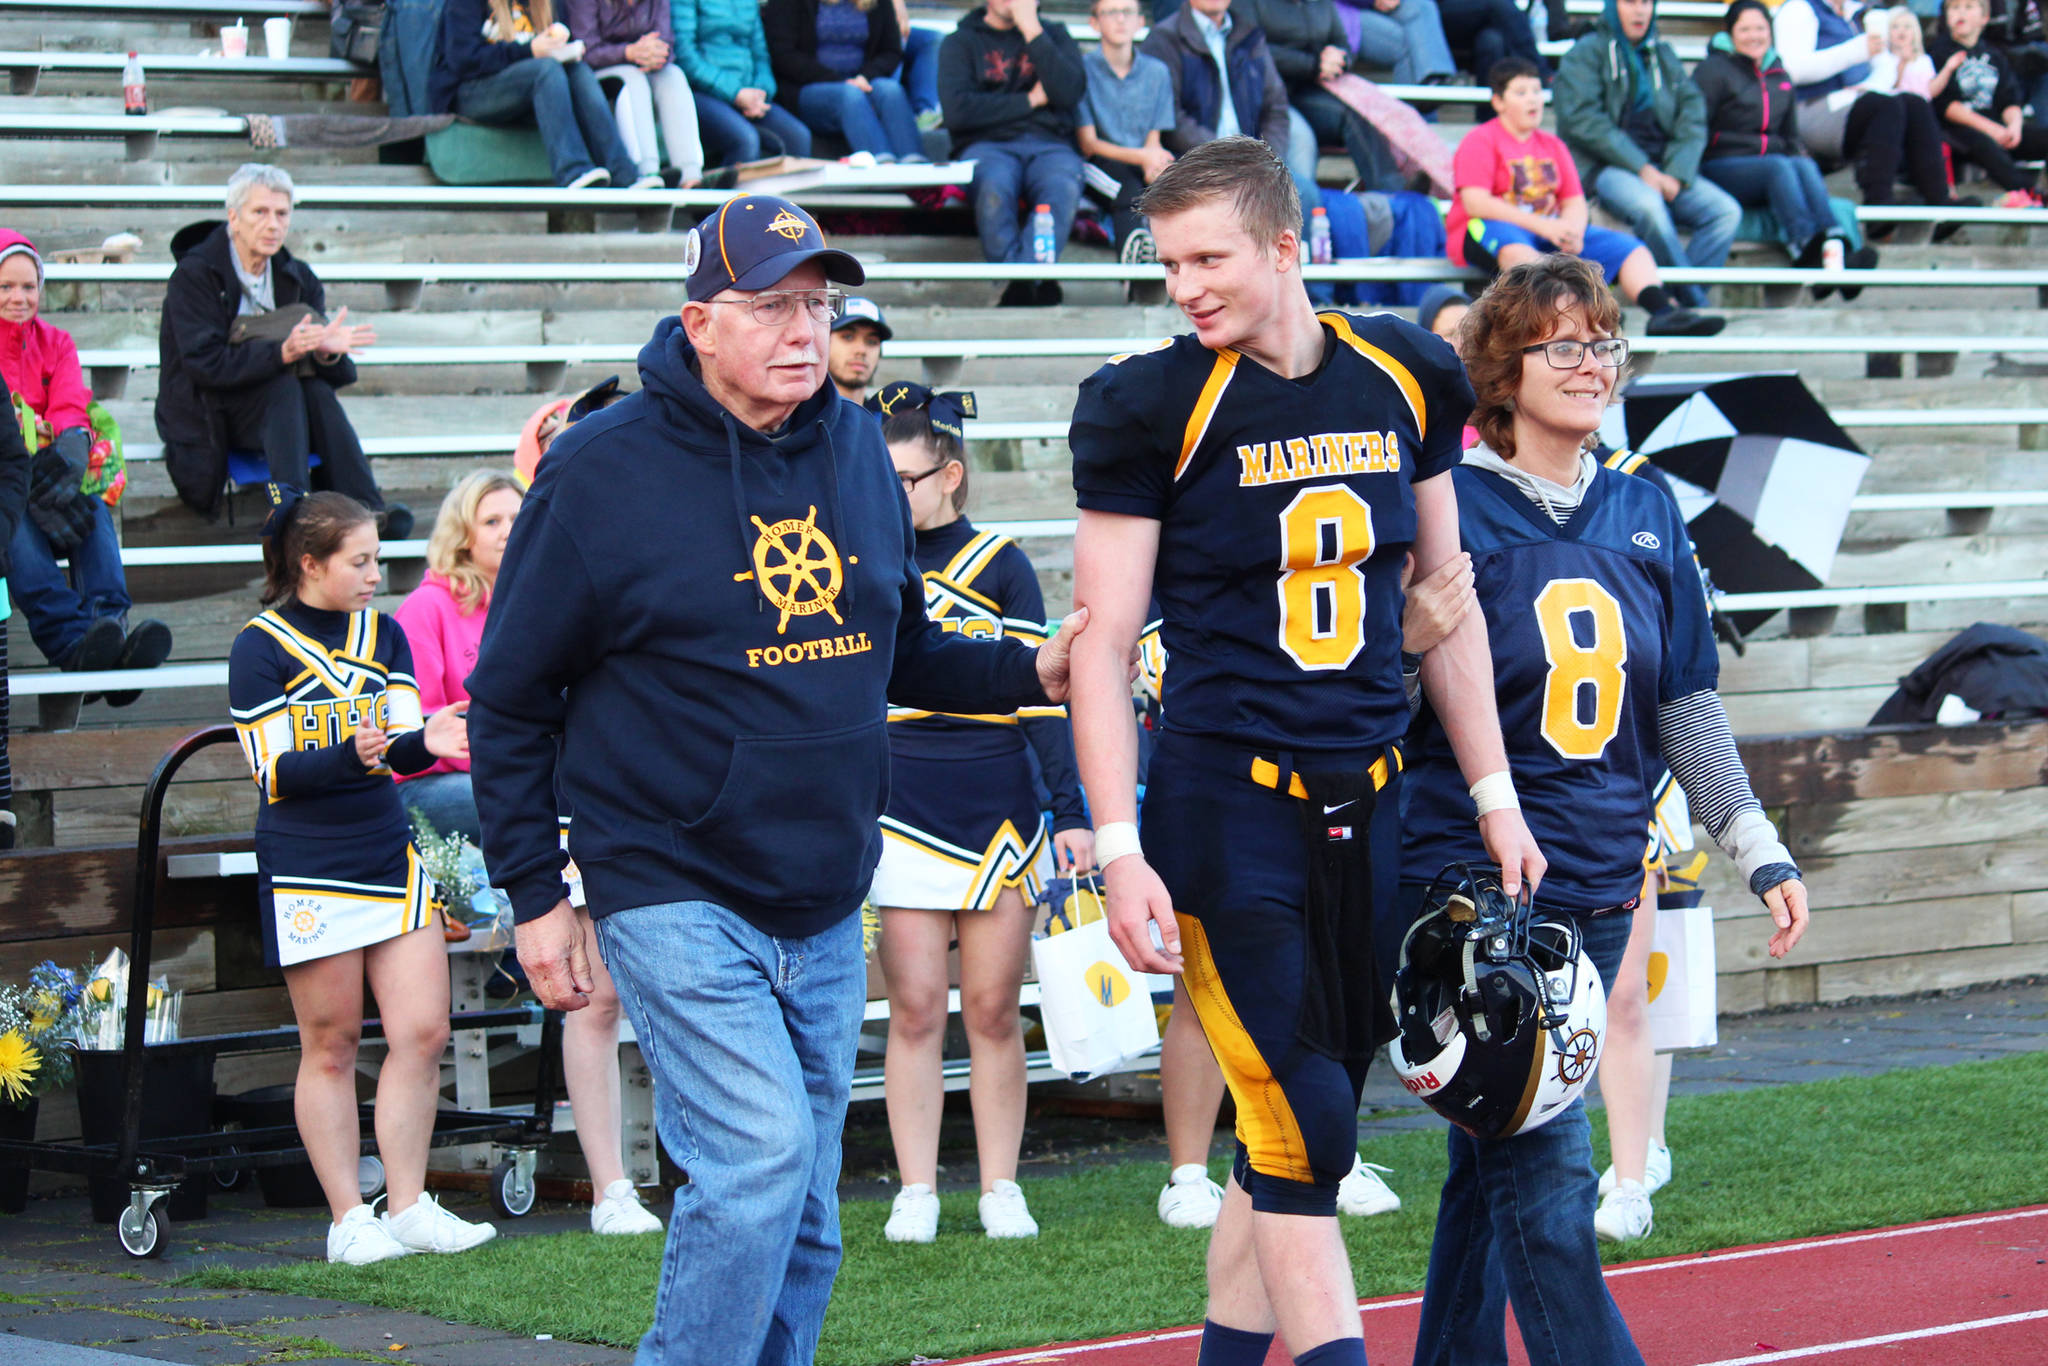 Homer senior and quarterback for the Mariners varsity football team Teddy Croft walks out to the field with his mother and grandfather during a senior night presentation during halftime of the team’s game against the Head of the Bay Cougars on Friday, Sept. 29, 2017 at the high school field in Homer, Alaska. The Mariners beat the Cougars 53-0. (Photo by Megan Pacer/Homer News)